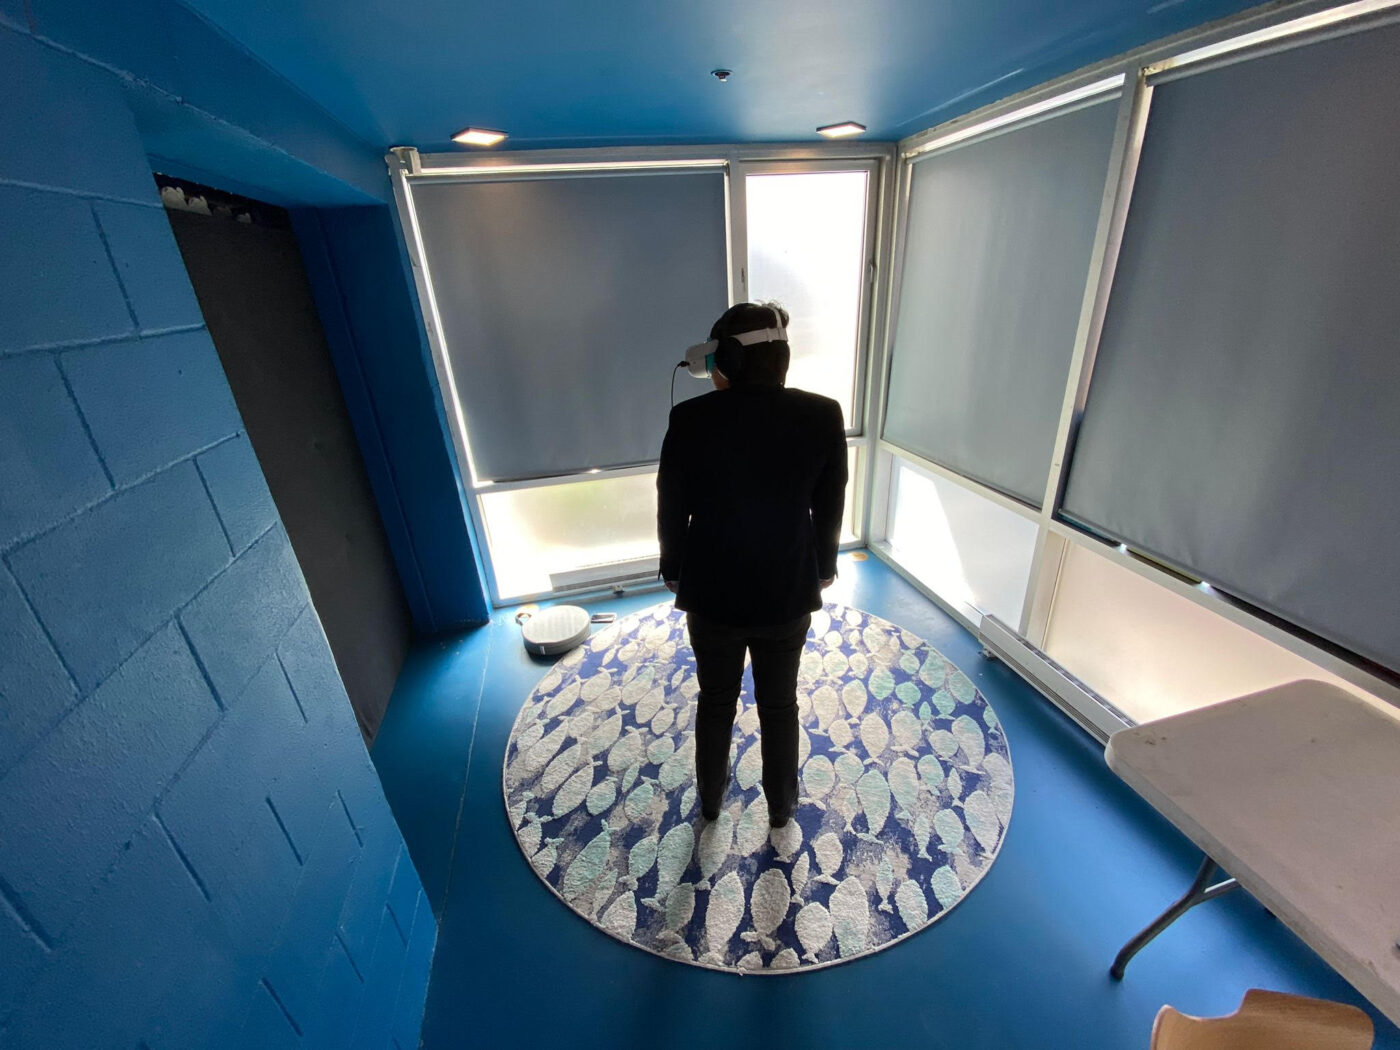 A person in by themselves in front of windows will all the blinds drawn. They face away from the camera, wearing a VR headset.